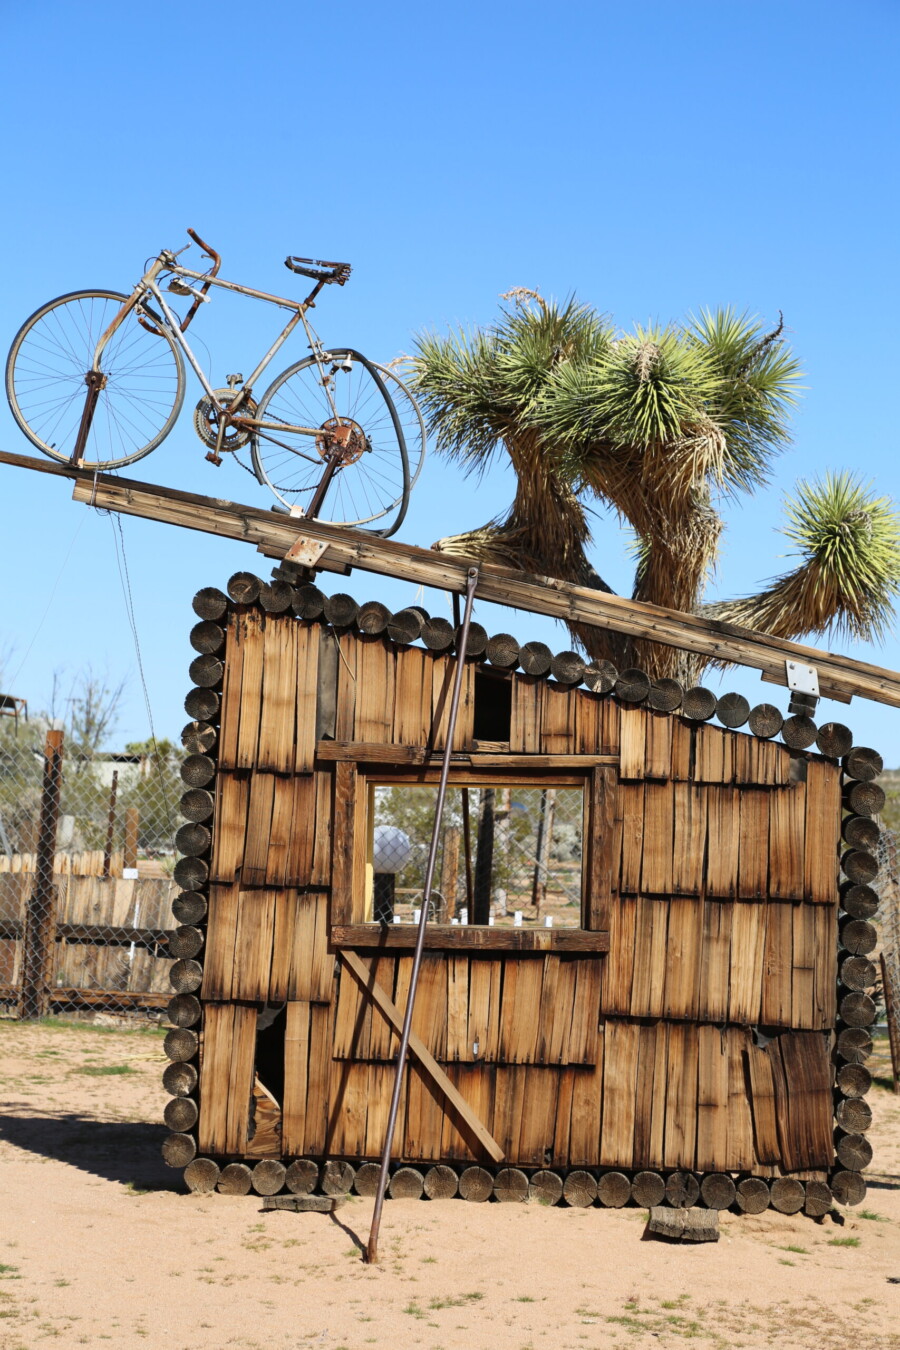 Sculpture installation of a wall with a bicycle balancing on top at the Noah Purifoy Museum of Assemblage Sculpture in Joshua Tree, Califorrnia.